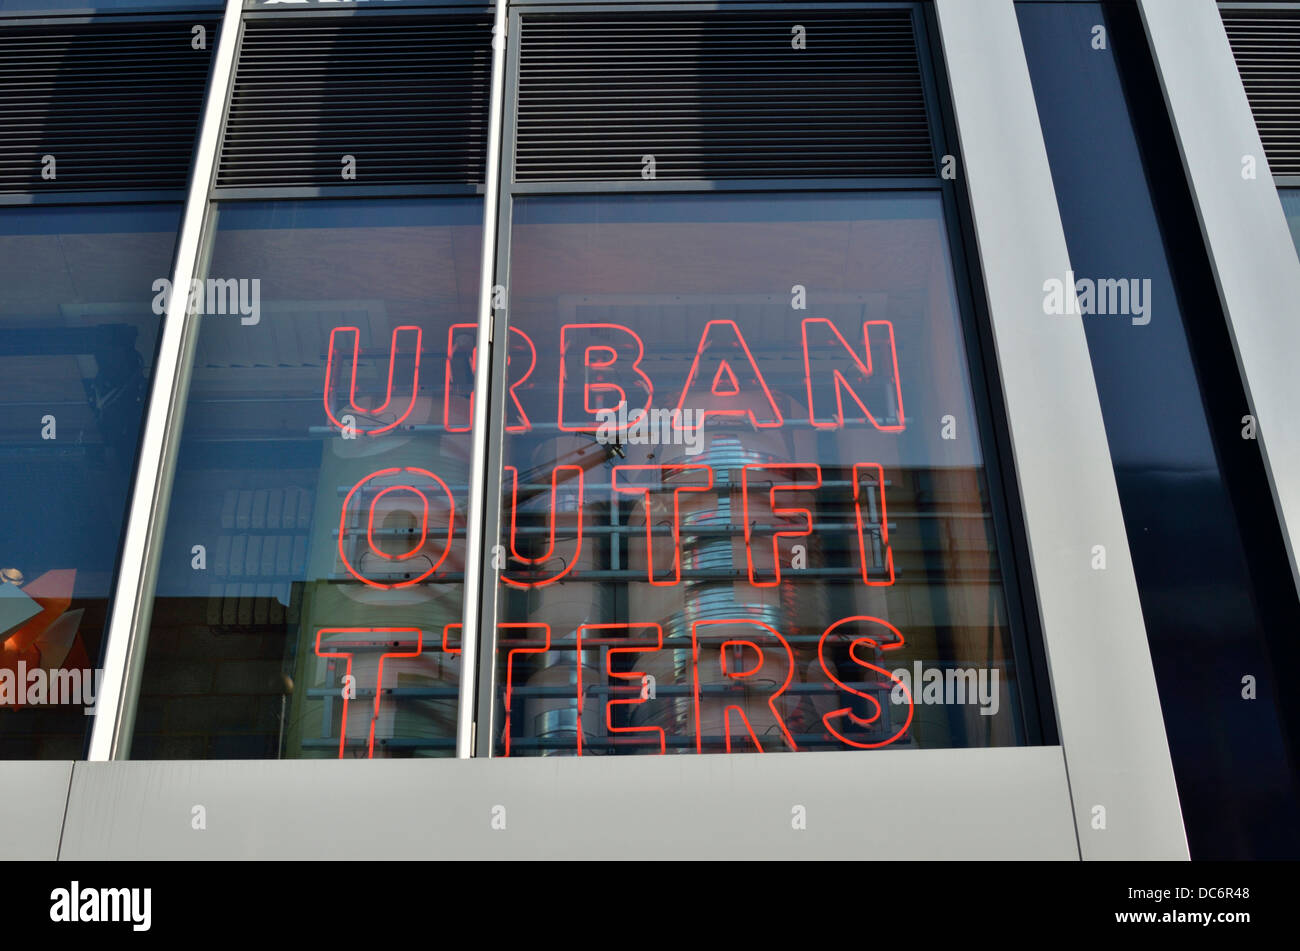 Urban Outfitters fashion retailer in Oxford Street, London, UK Stock ...